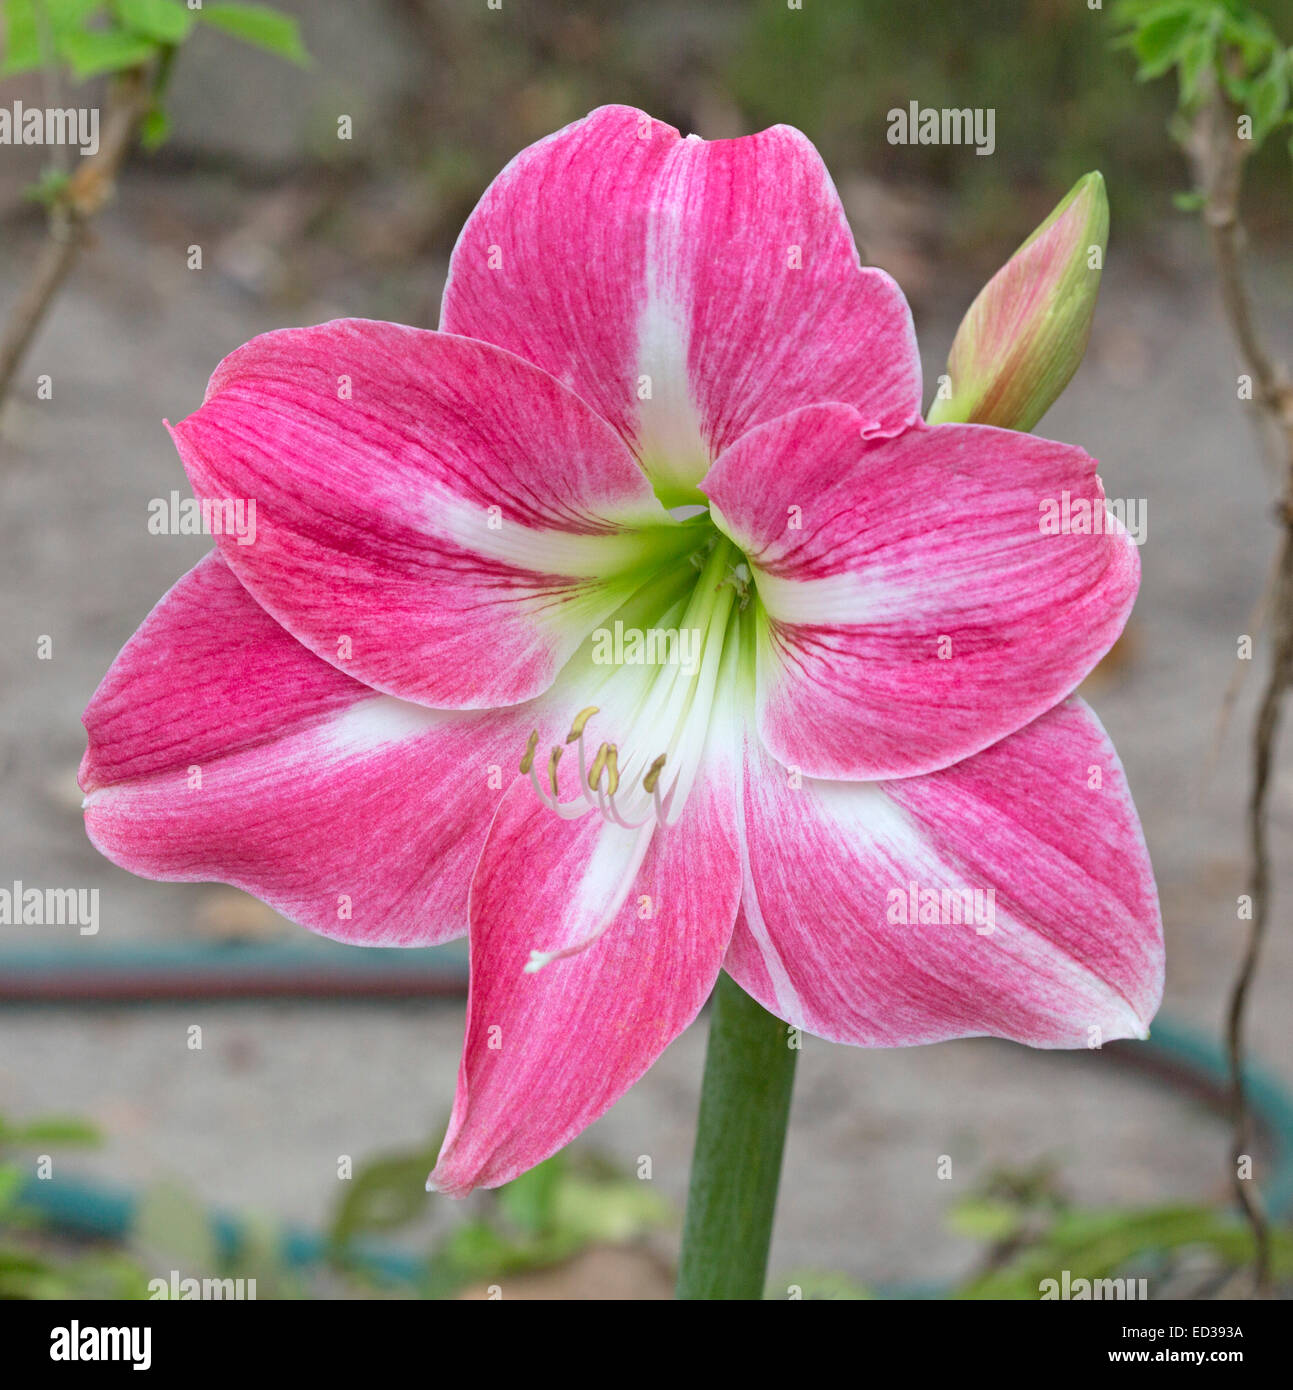 Large vivid pink Hippeastrum flower with white striped petals & green throat against light grey background Stock Photo